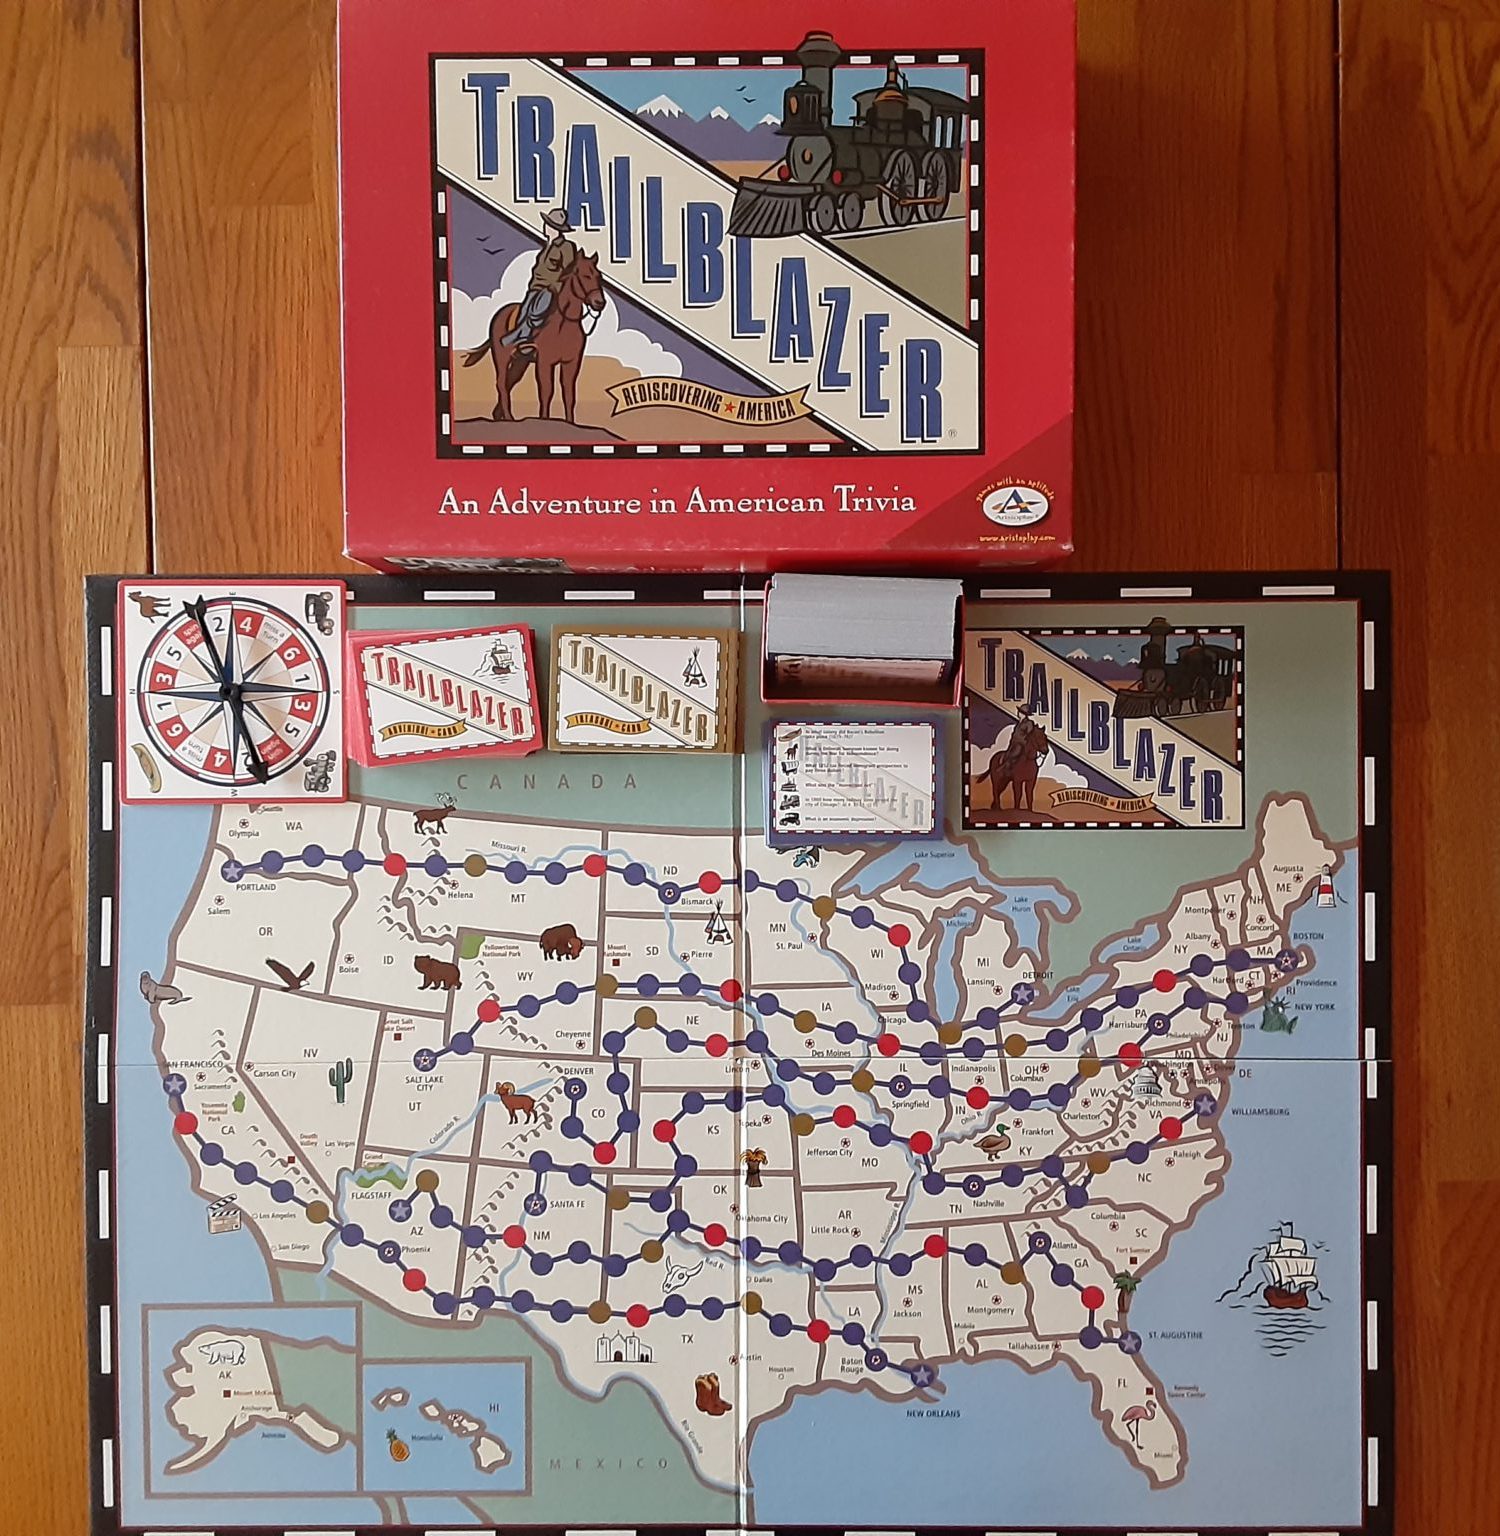 Picture of Trailblazer a history board game. Image of board, cards, spinner.